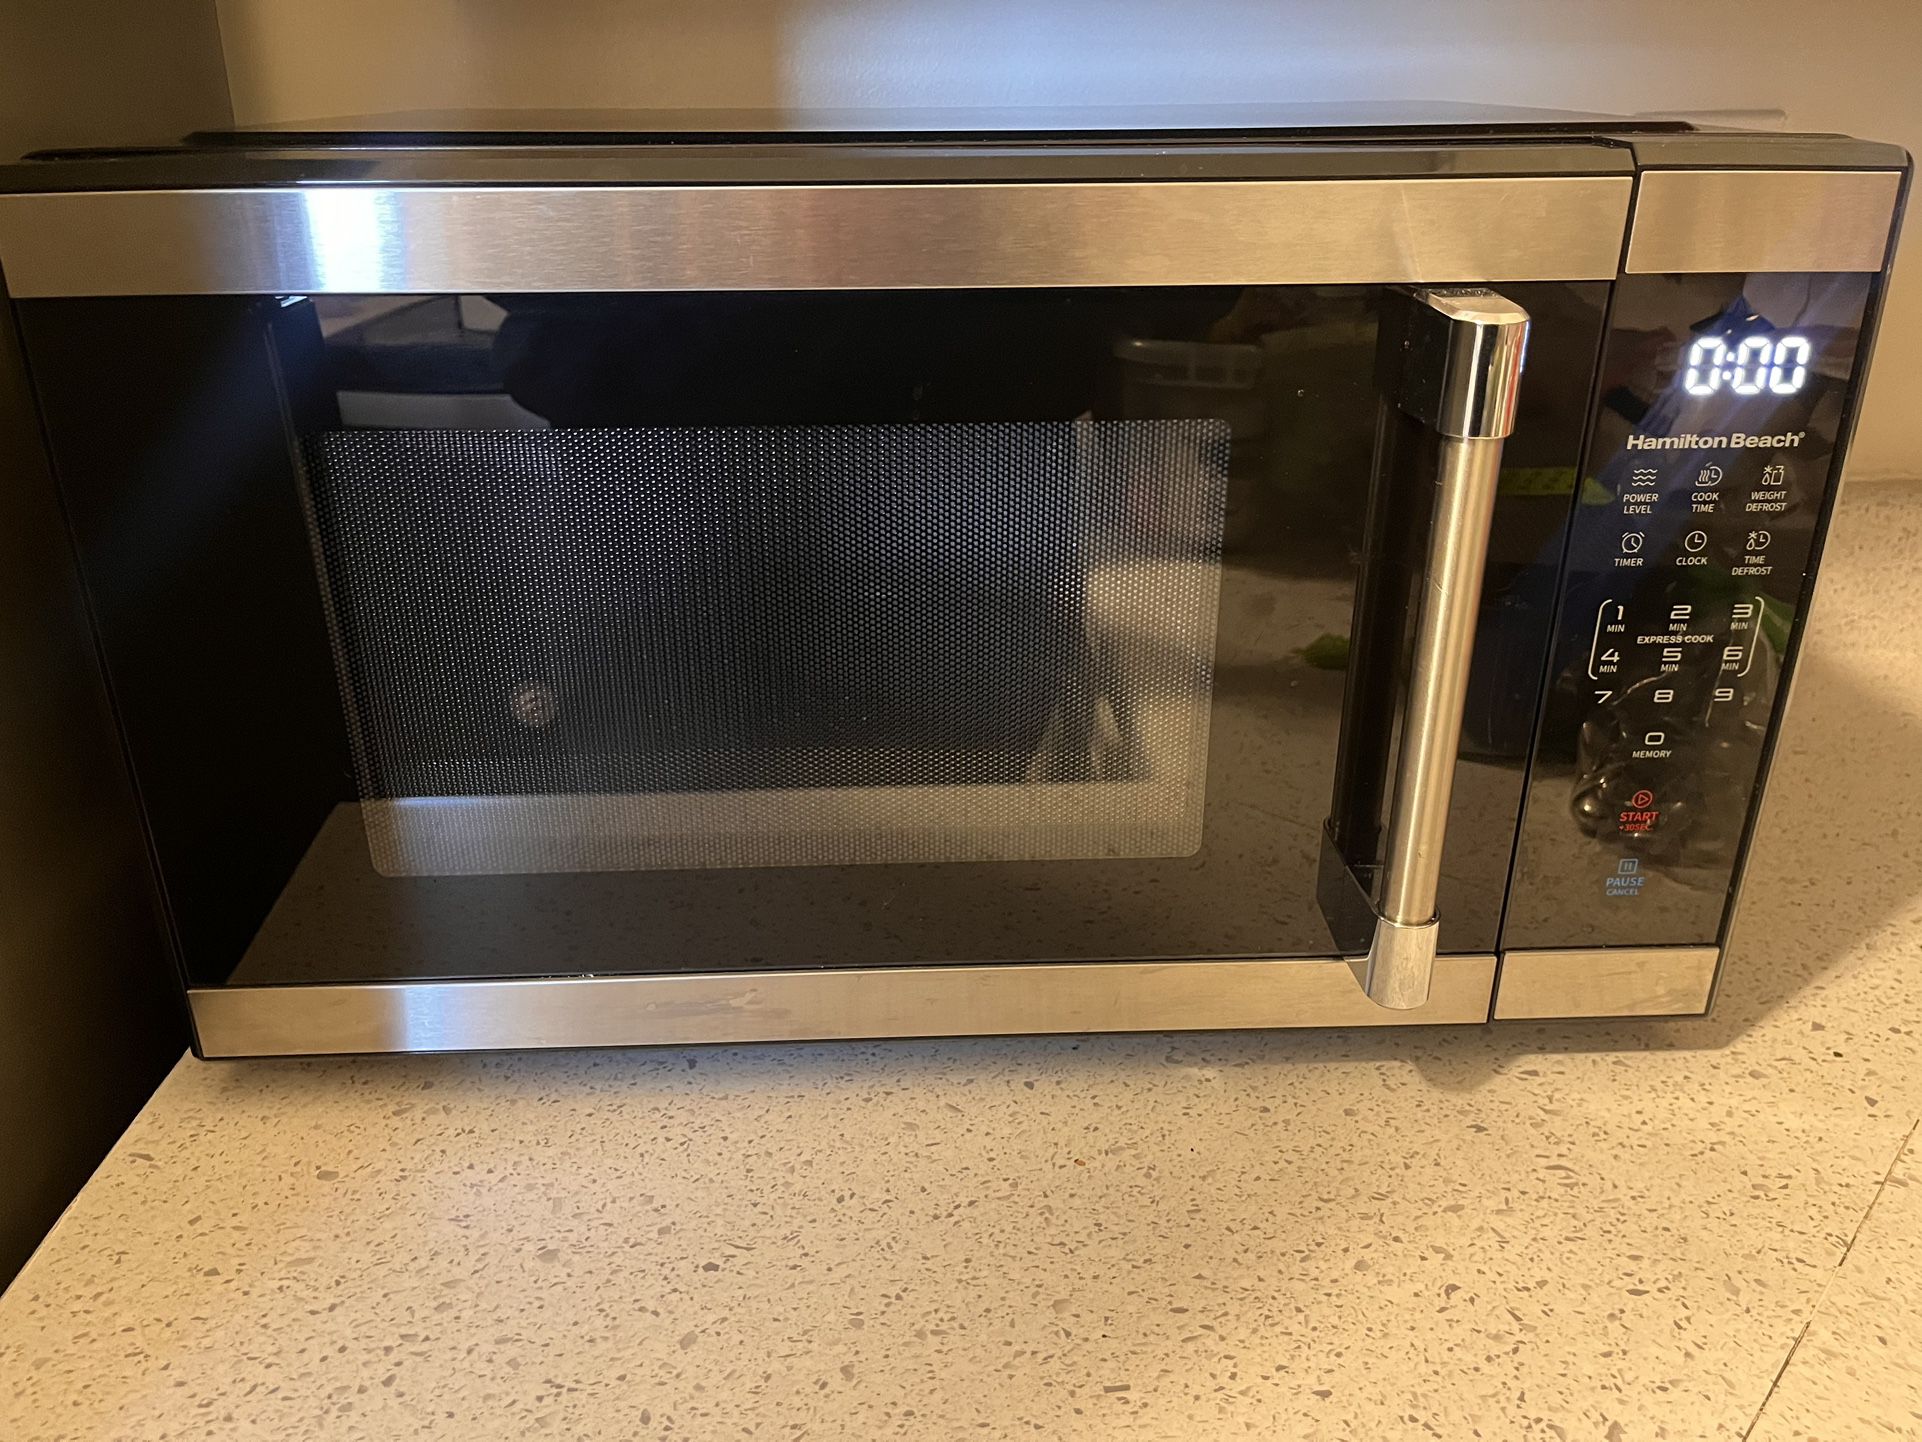 Microwave Excellent Condition $30 OBO